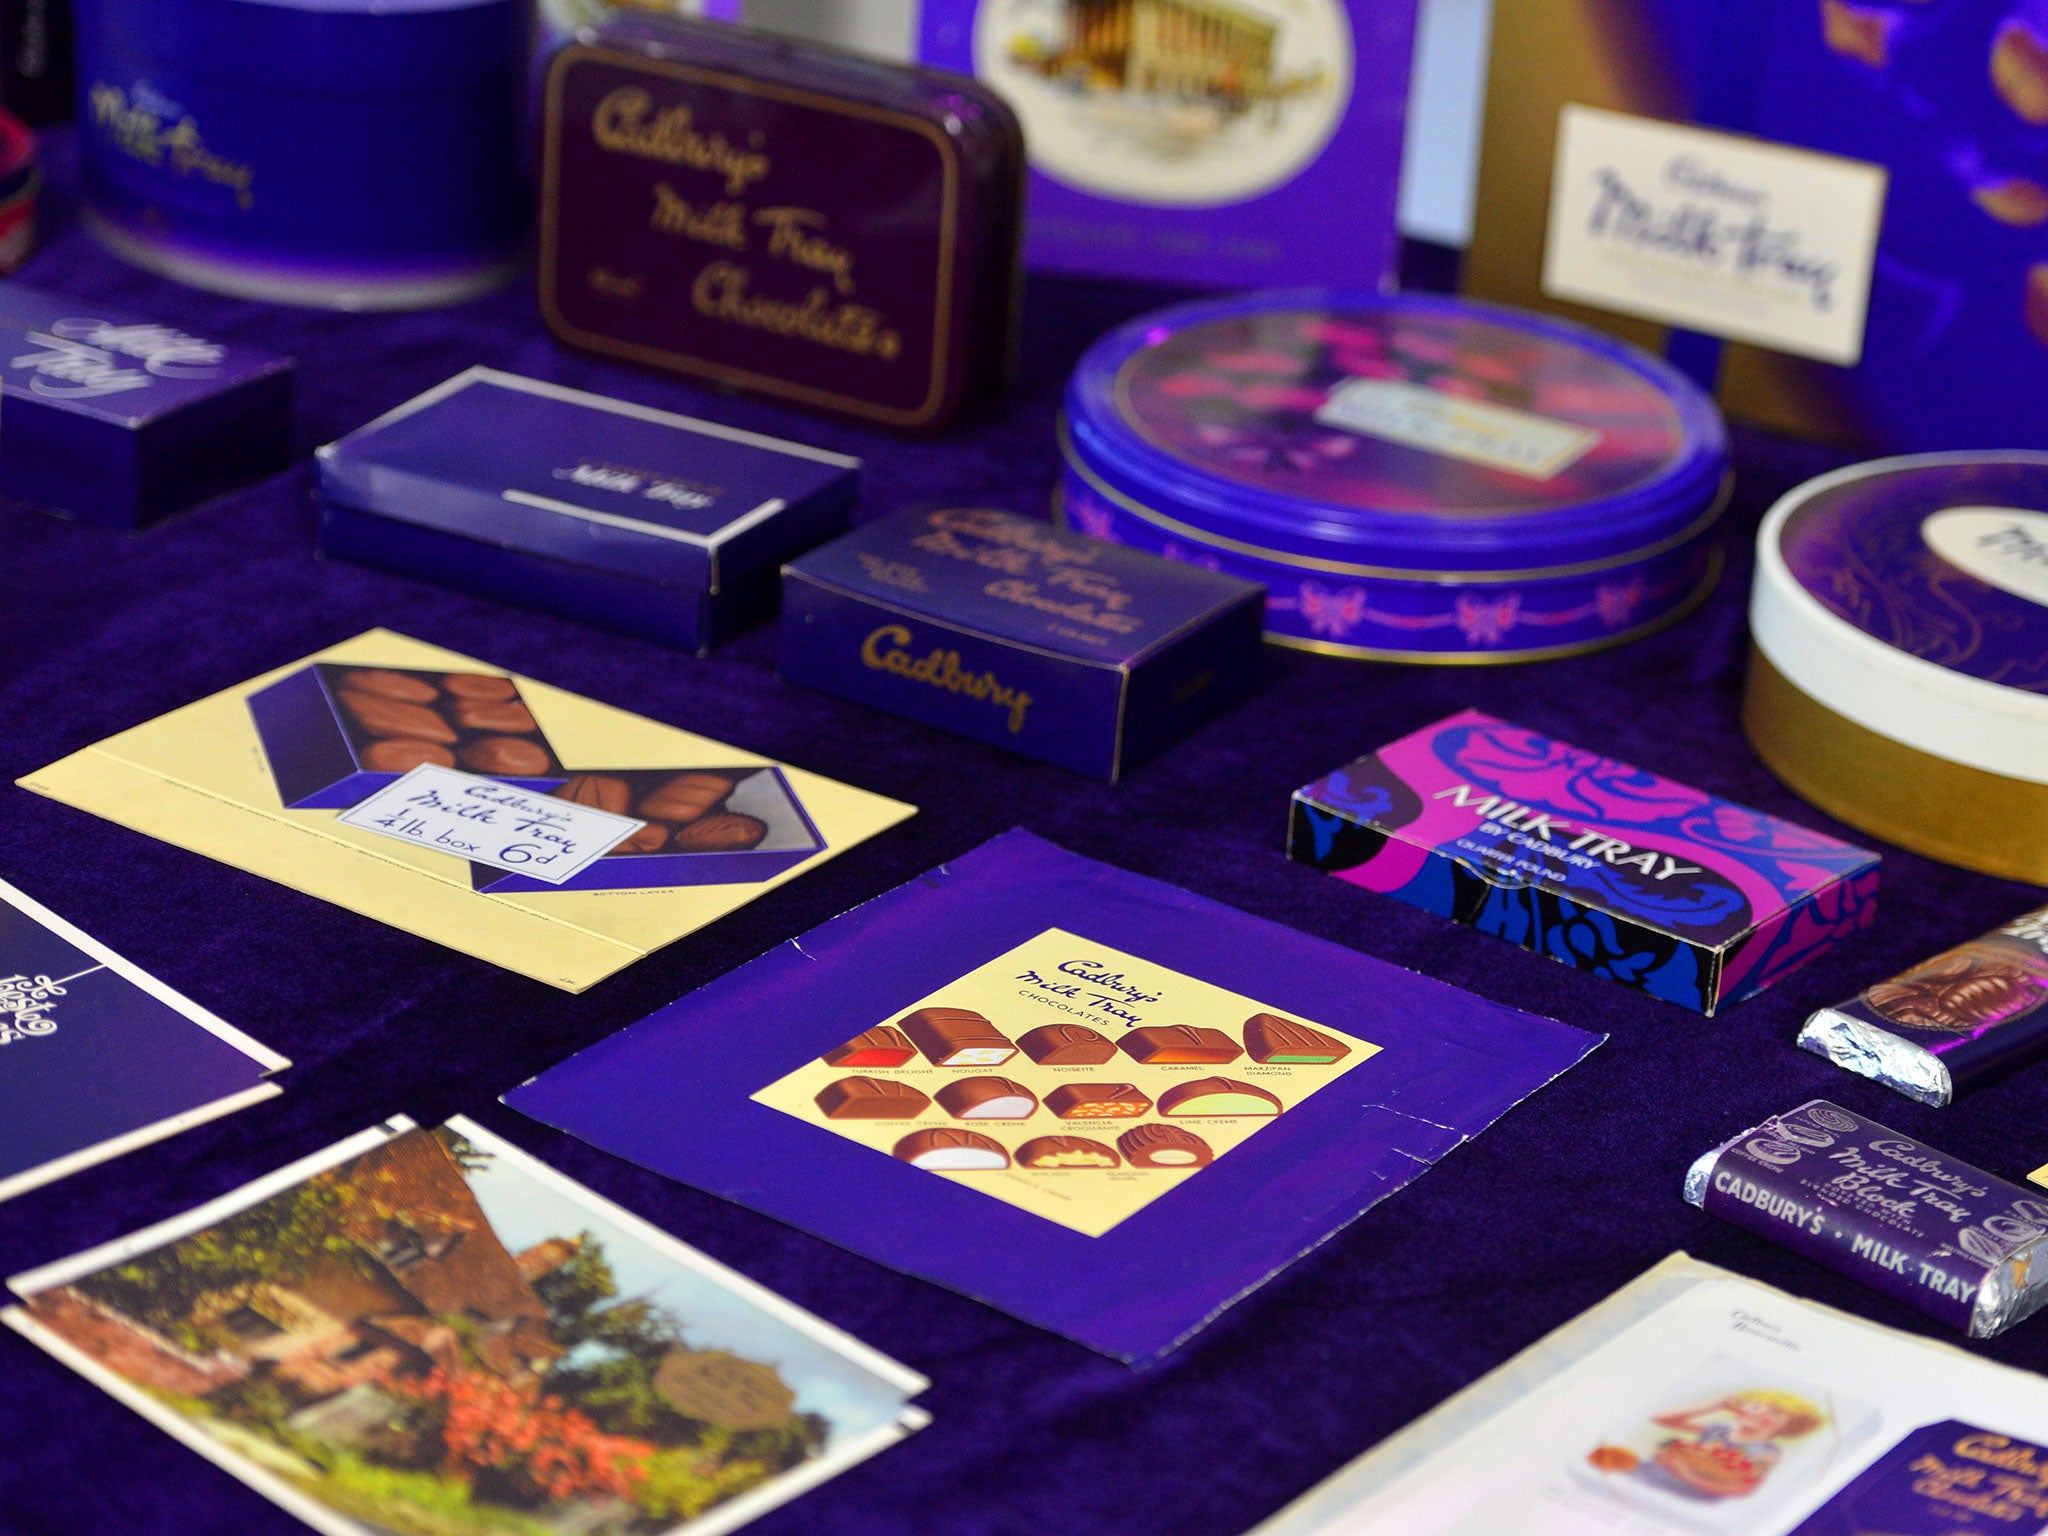 Milk Tray was first sold by Cadbury in 1915.